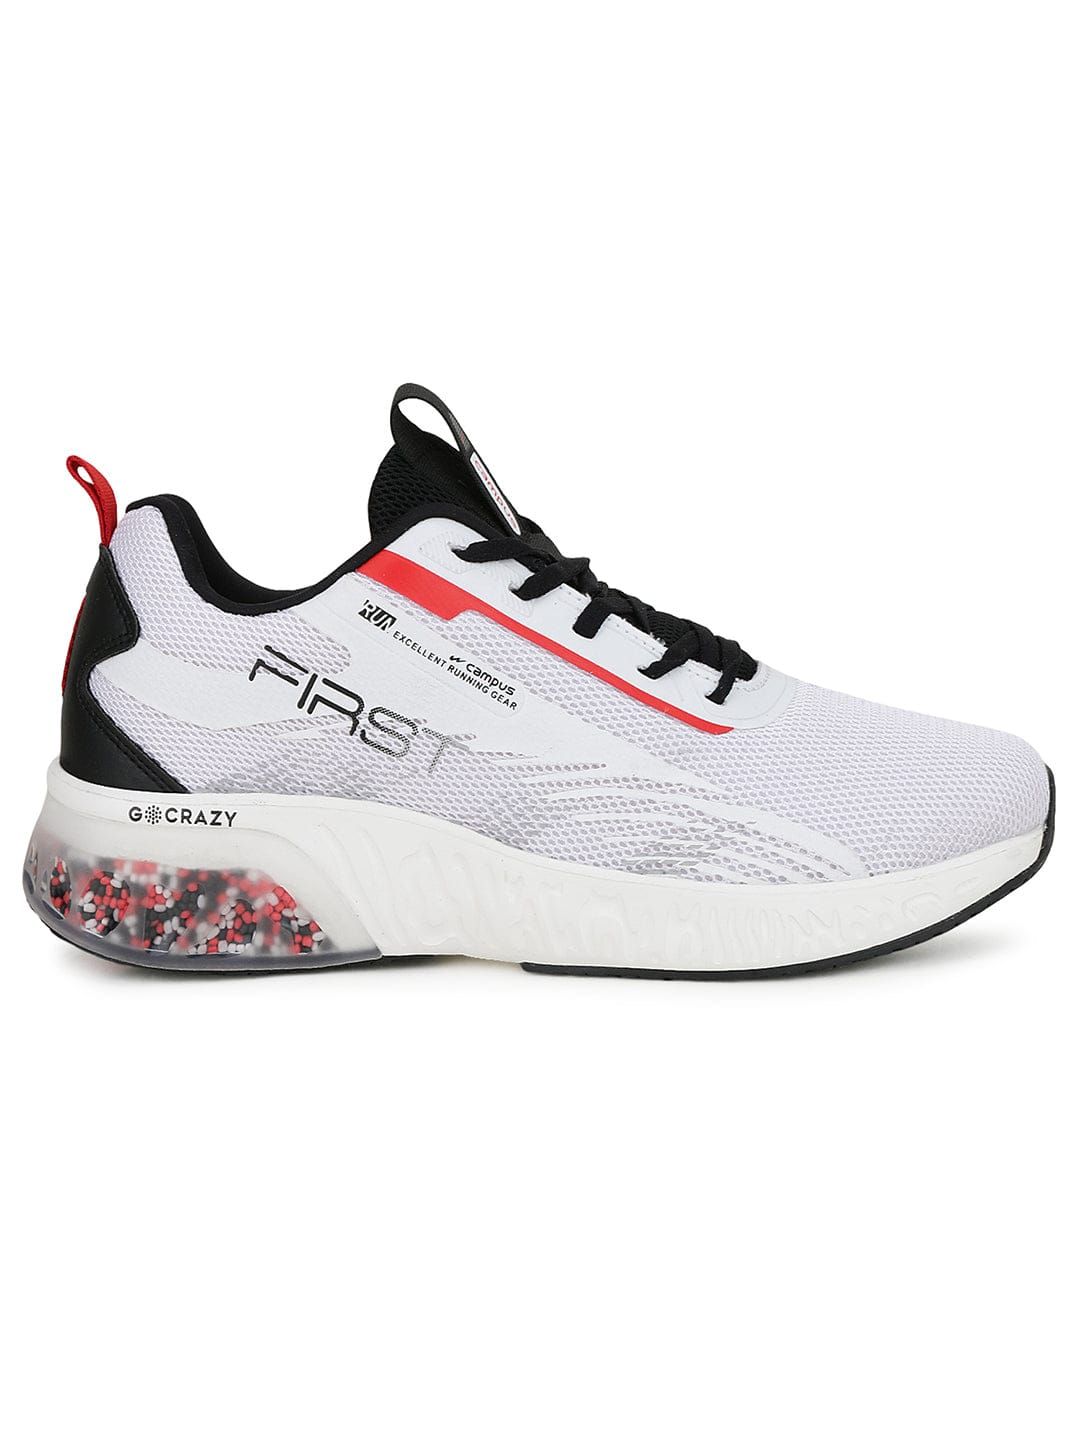 Buy Men White First Running Shoes From Fancode Shop.